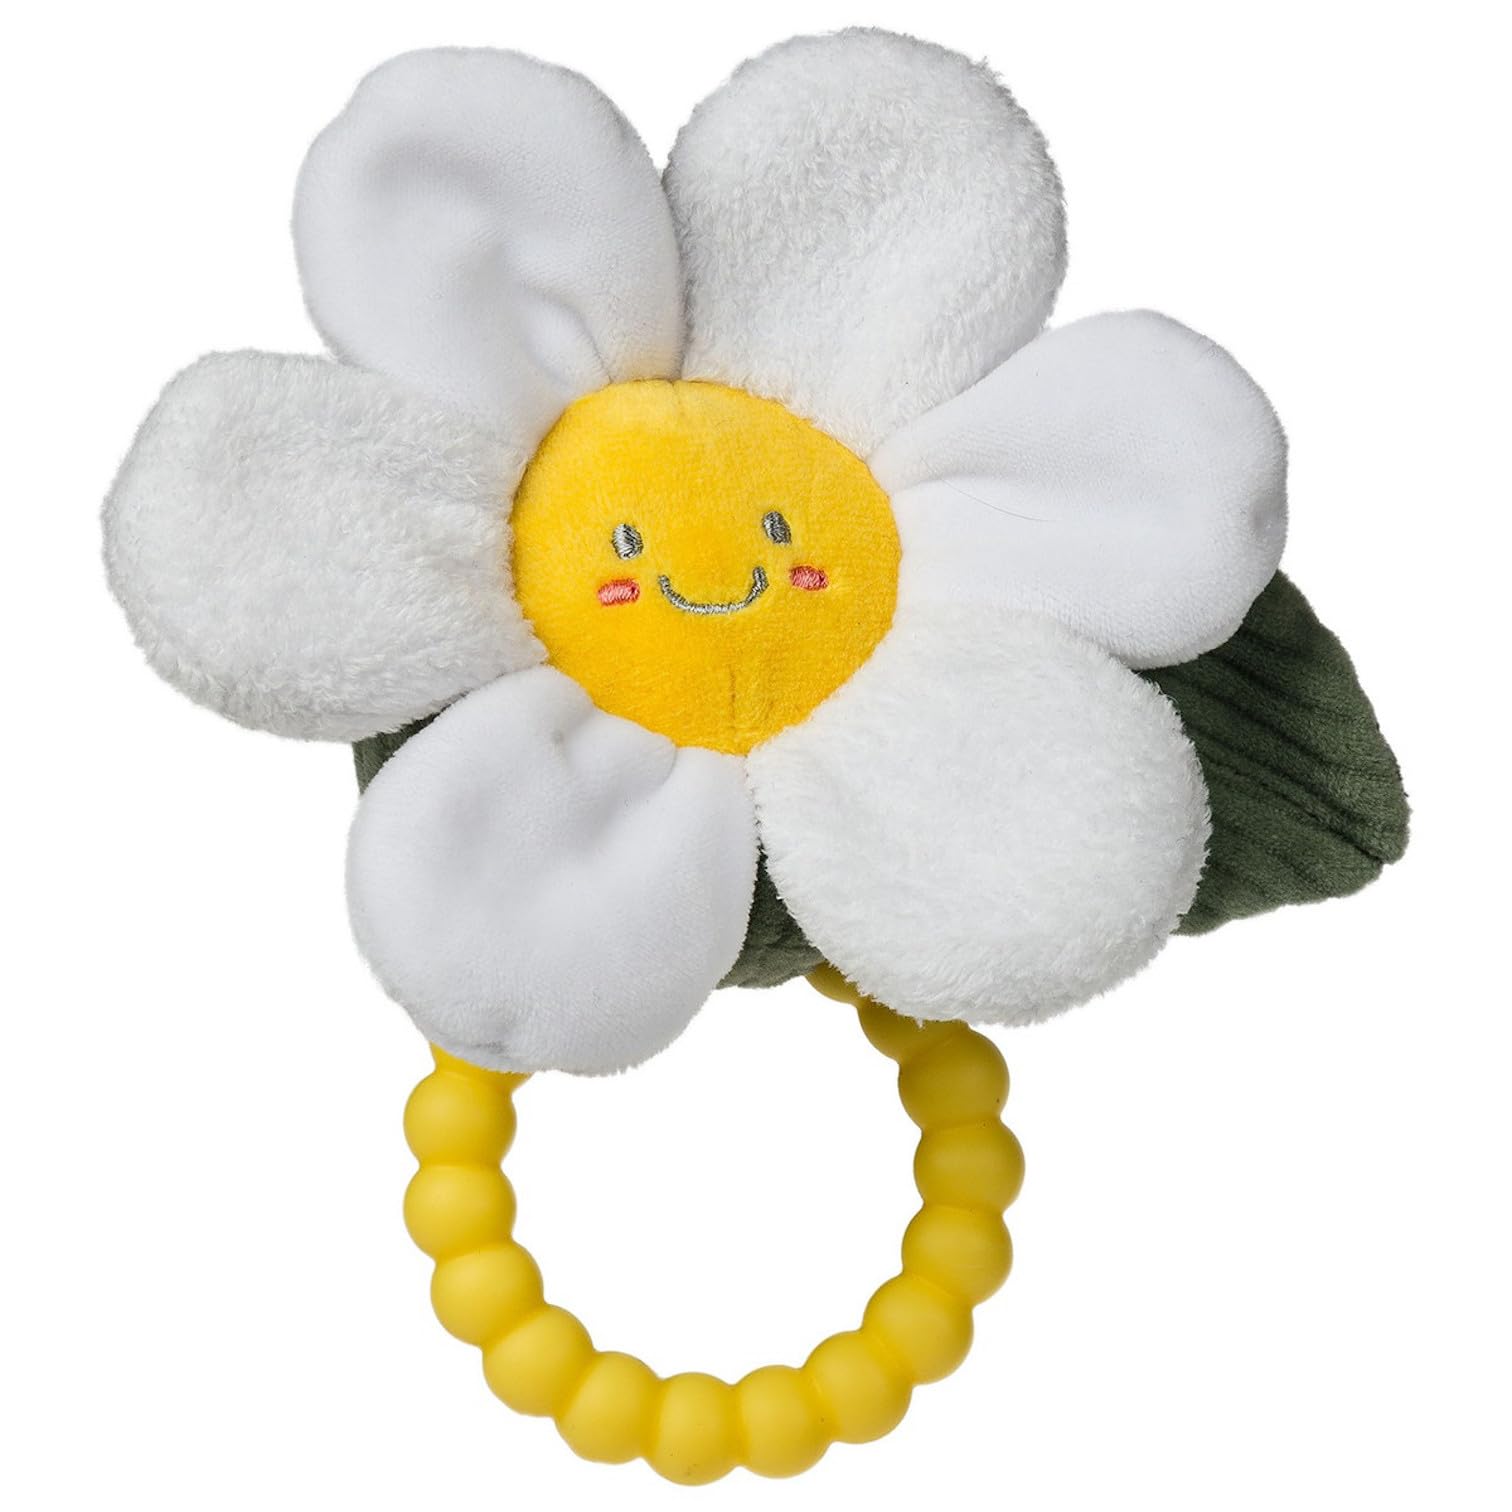 Mary Meyer Sweet Soothie Soft Baby Rattle with Teether Ring, 5-Inches, Daisy